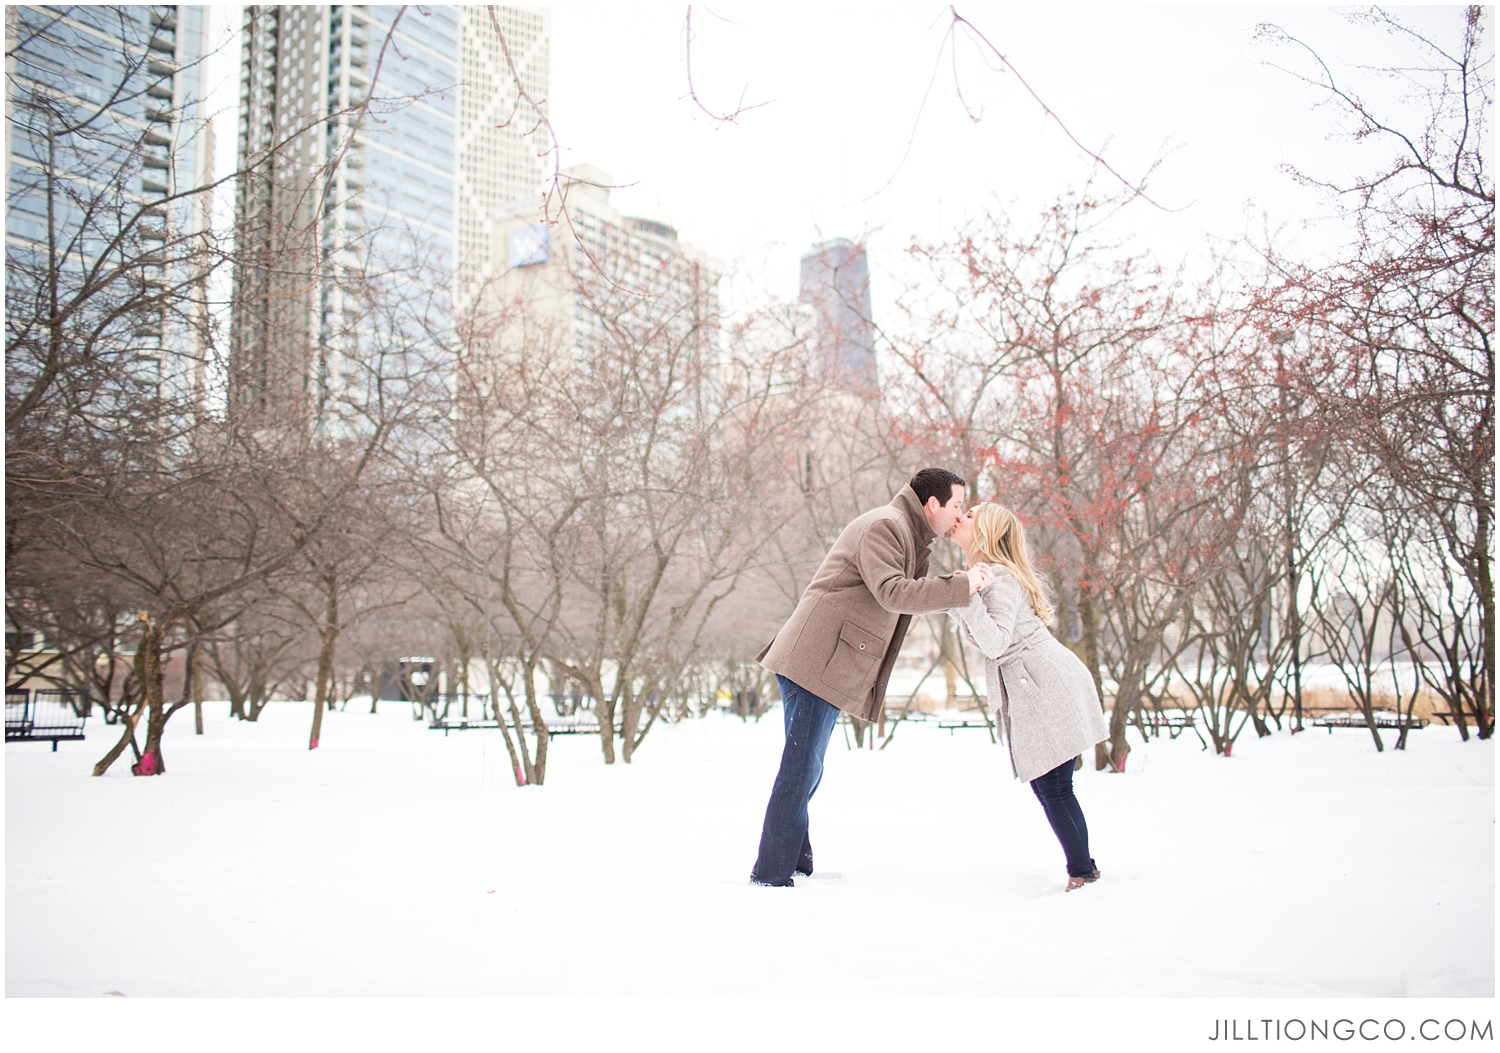 Olive Park Engagement Photos | Chicago Engagement Photos | Chicago Engagement Photos Location Ideas | Jill Tiongco Photography